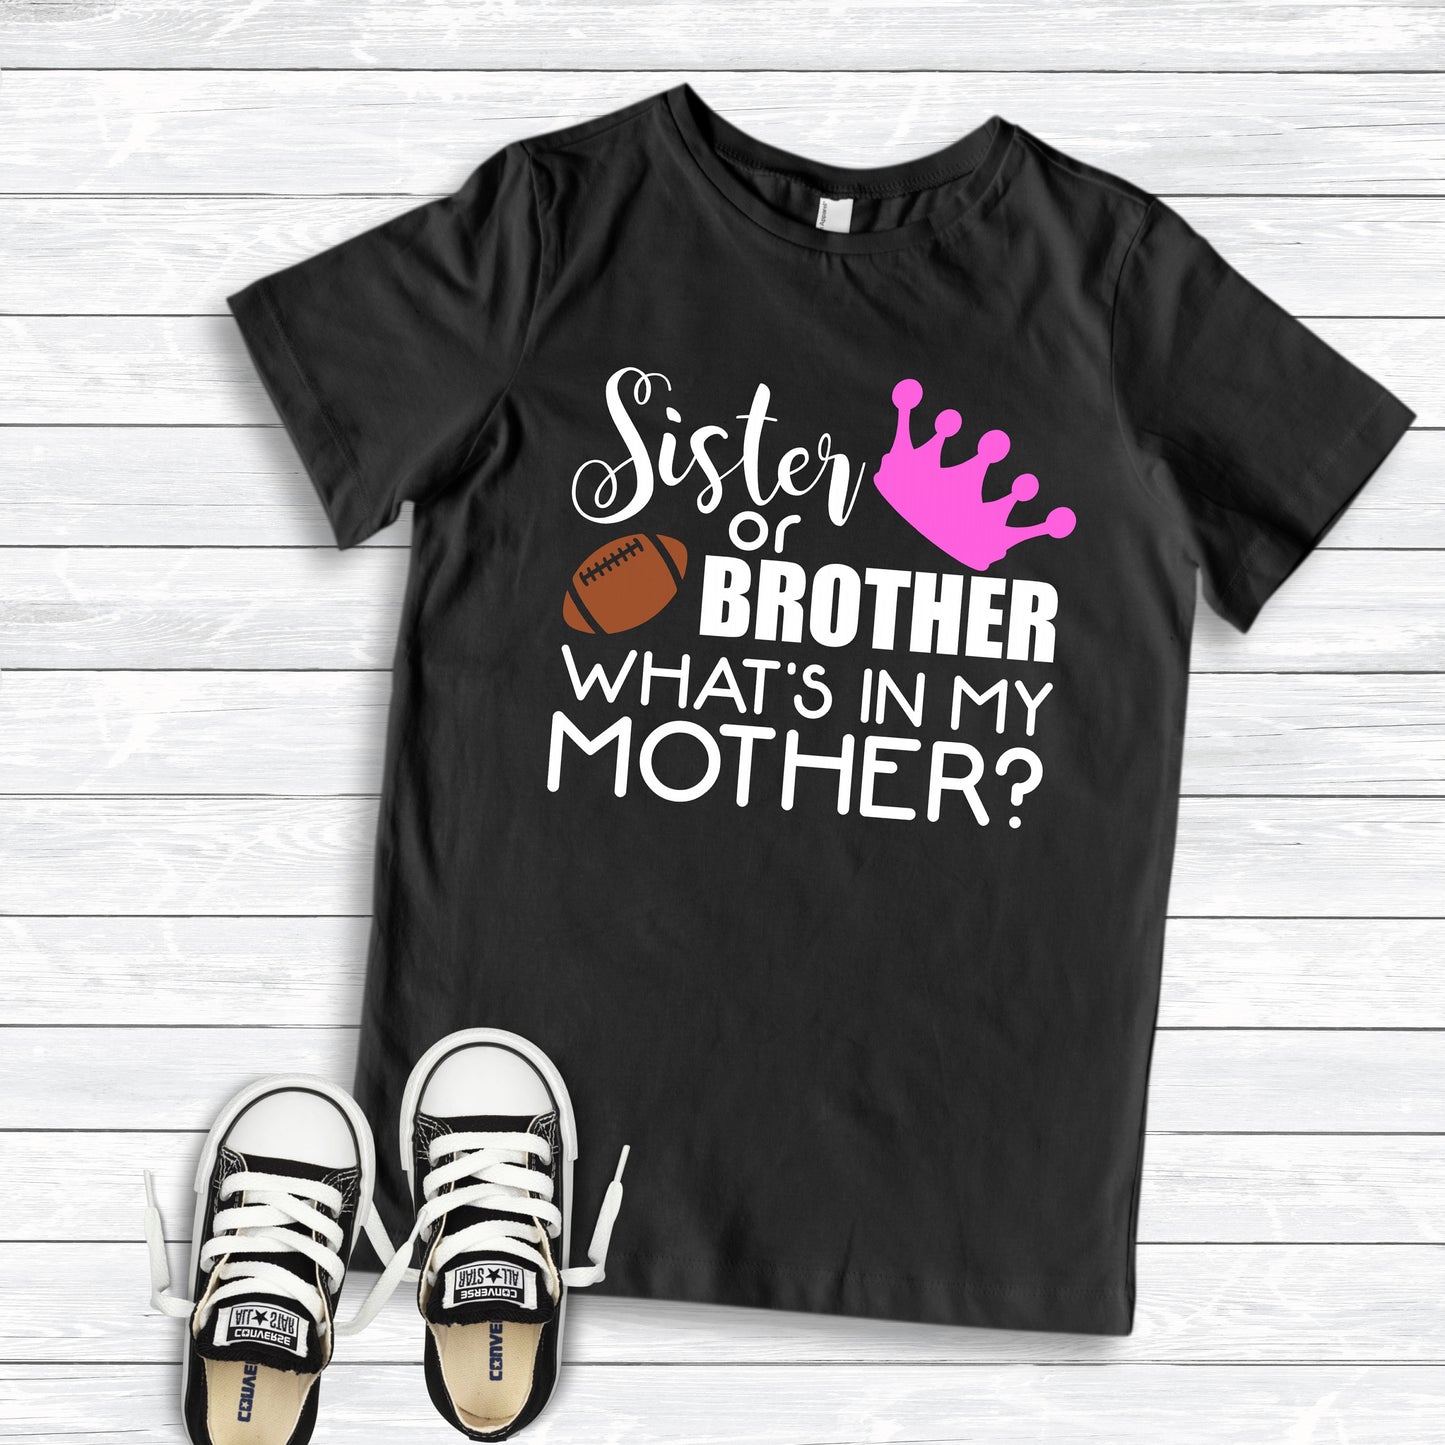 Sister or Brother What's In My Mother Infant or Toddler Shirt or Bodysuit - gender reveal t-shirt - big brother shirt - big sister shirt